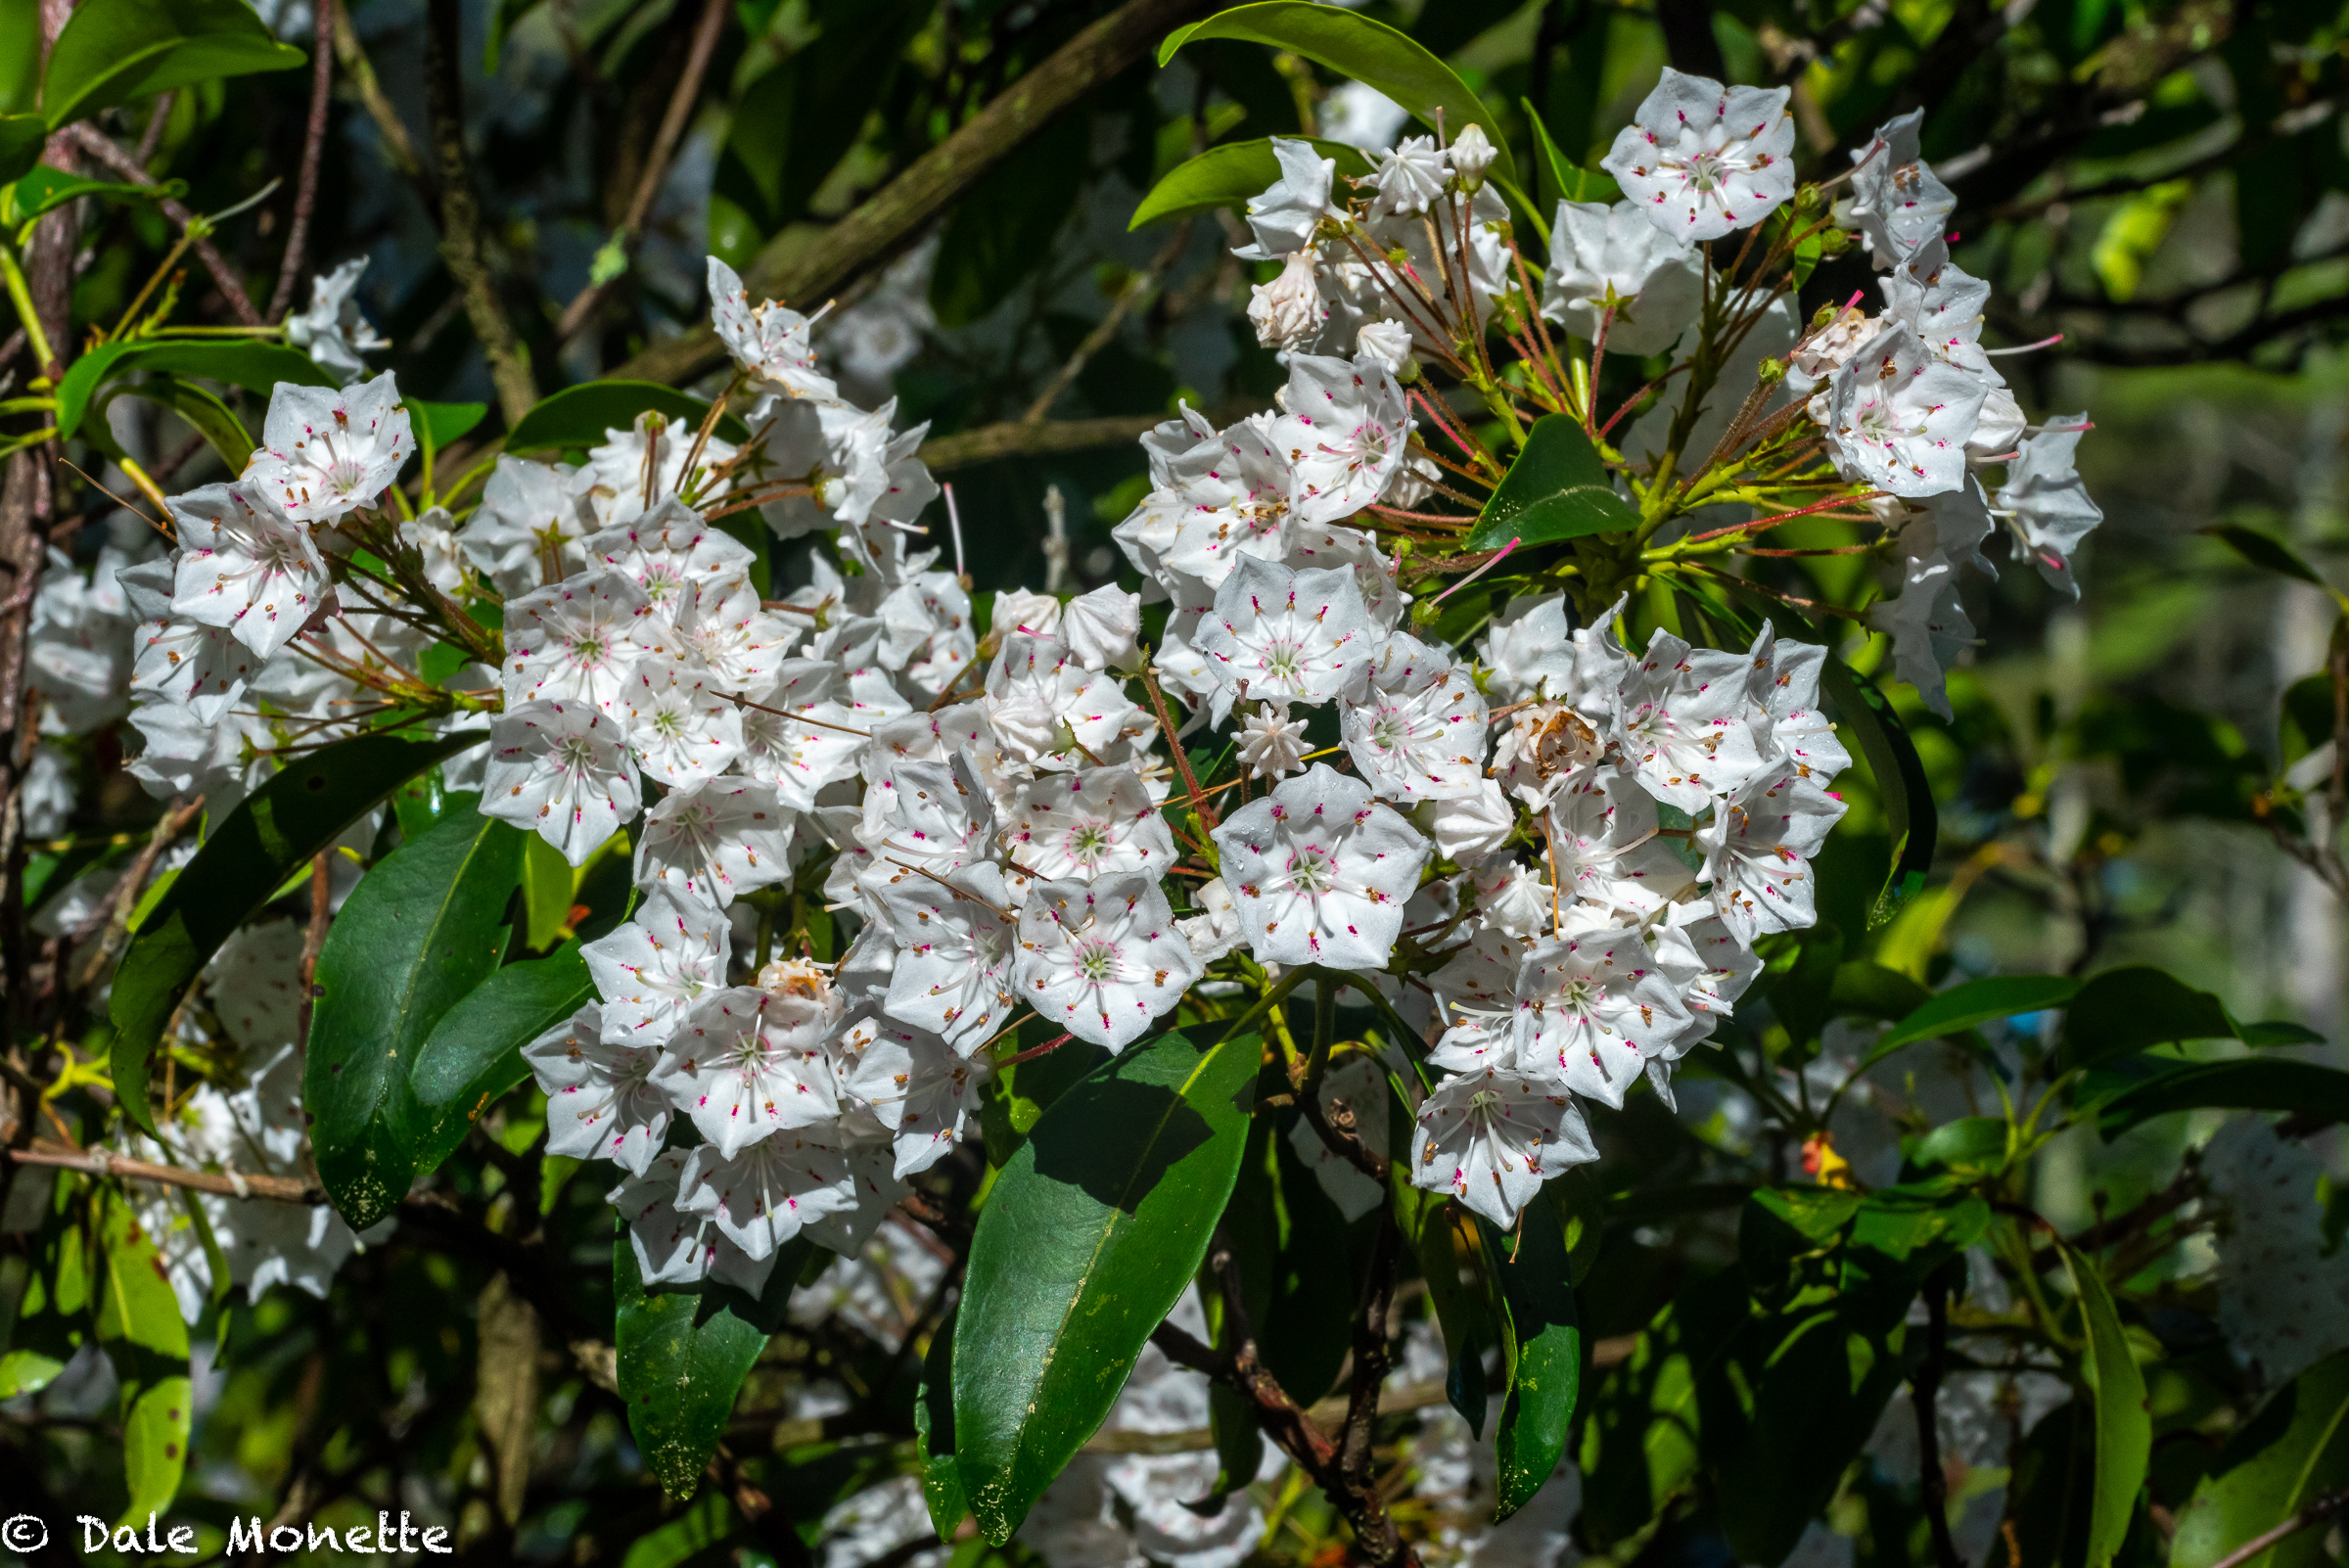   The mountain laurel in north central Massachusetts this year is awesome!    